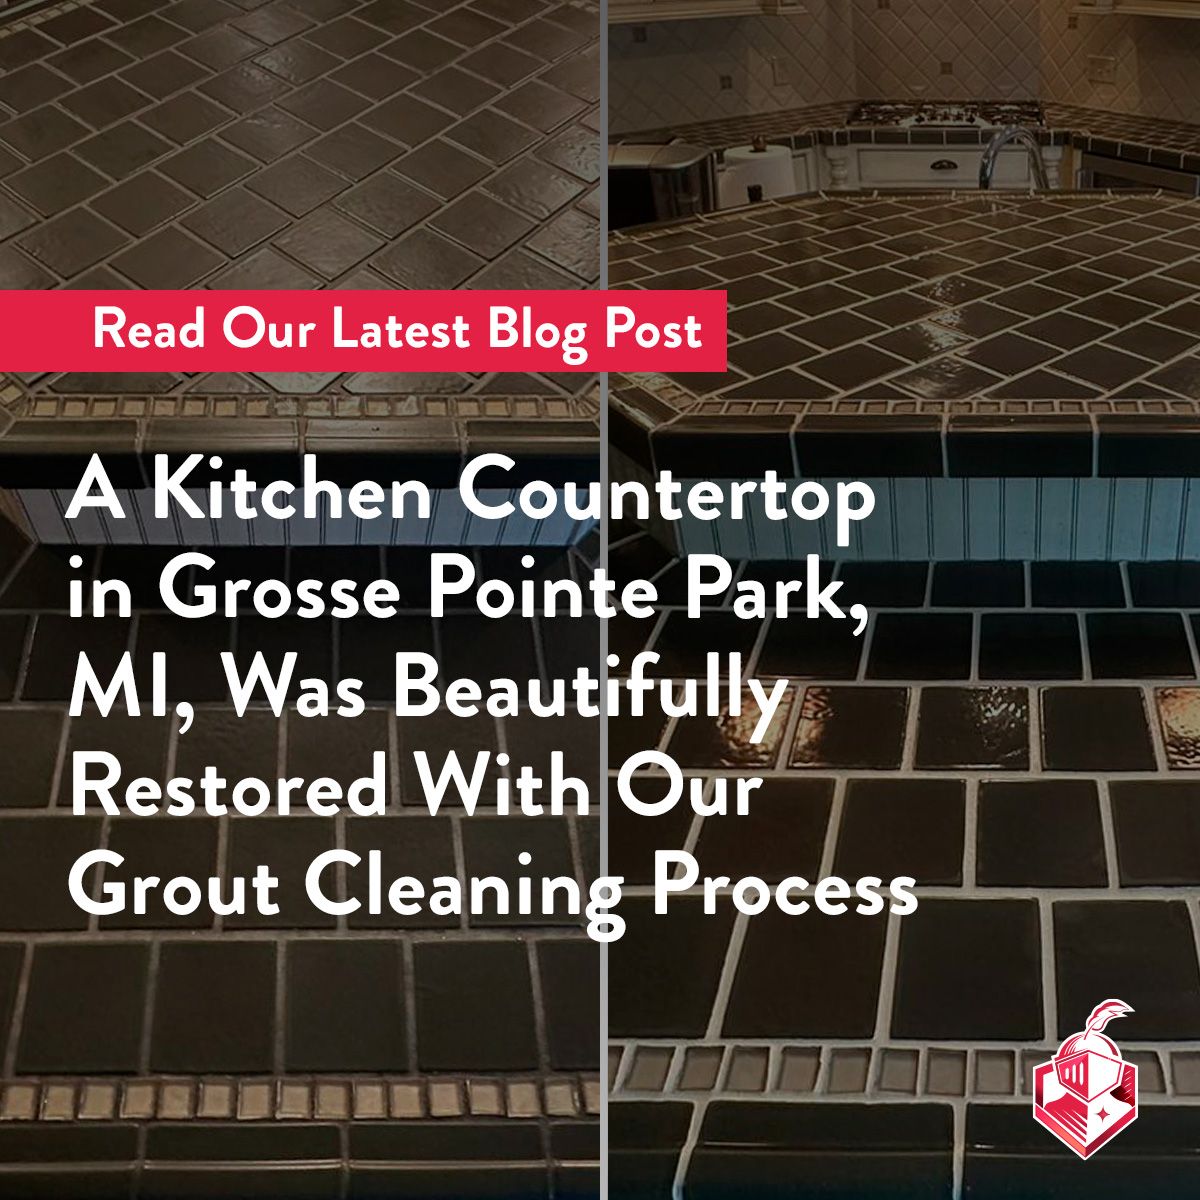 A Kitchen Countertop in Grosse Pointe Park, MI, Was Beautifully Restored With Our Grout Cleaning Process